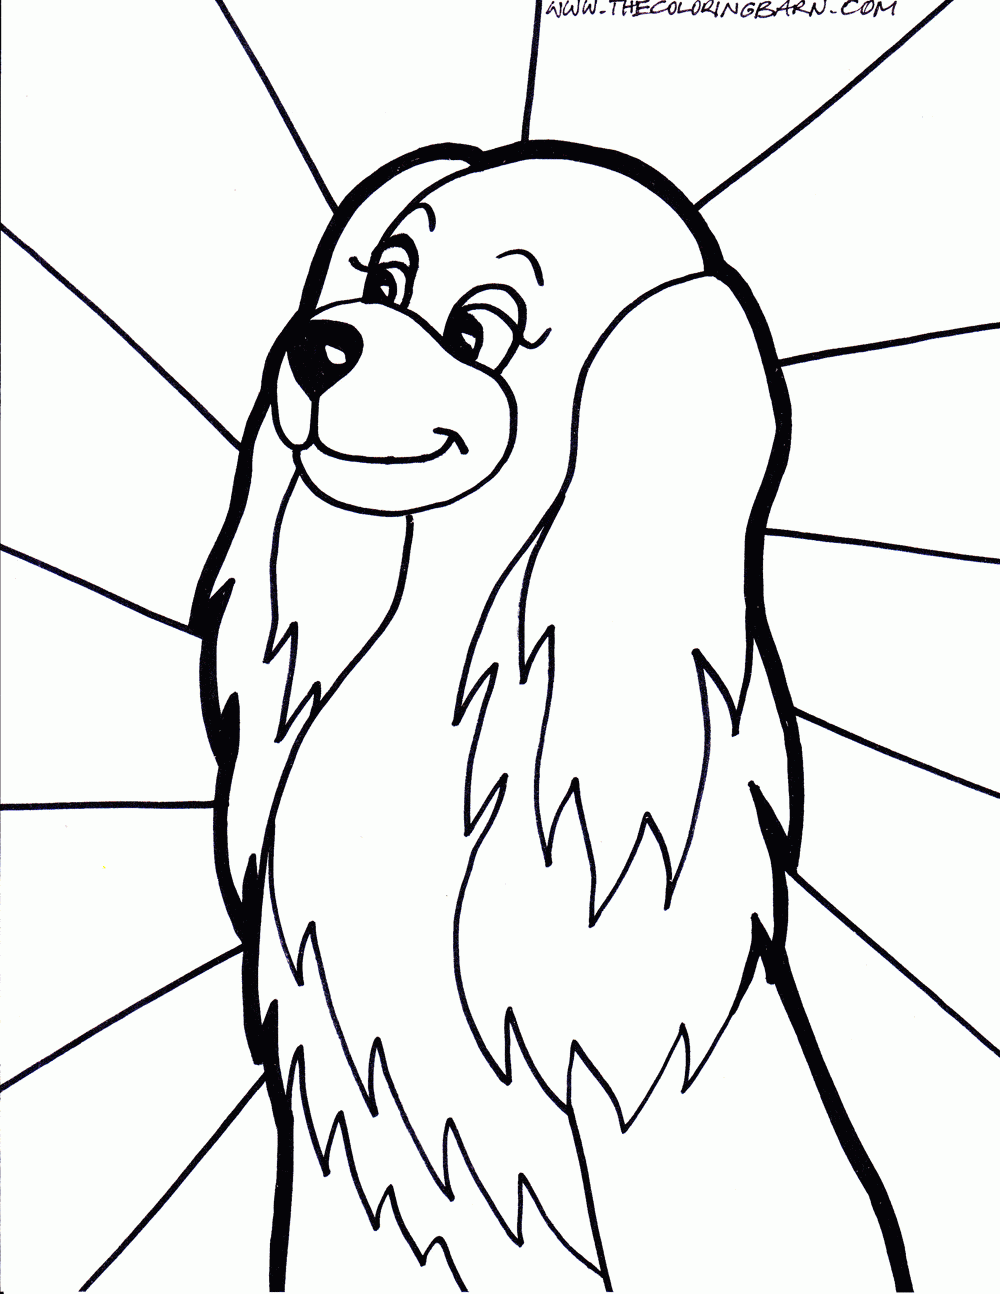 Cute Cartoon Dog Coloring Pages - Coloring Page